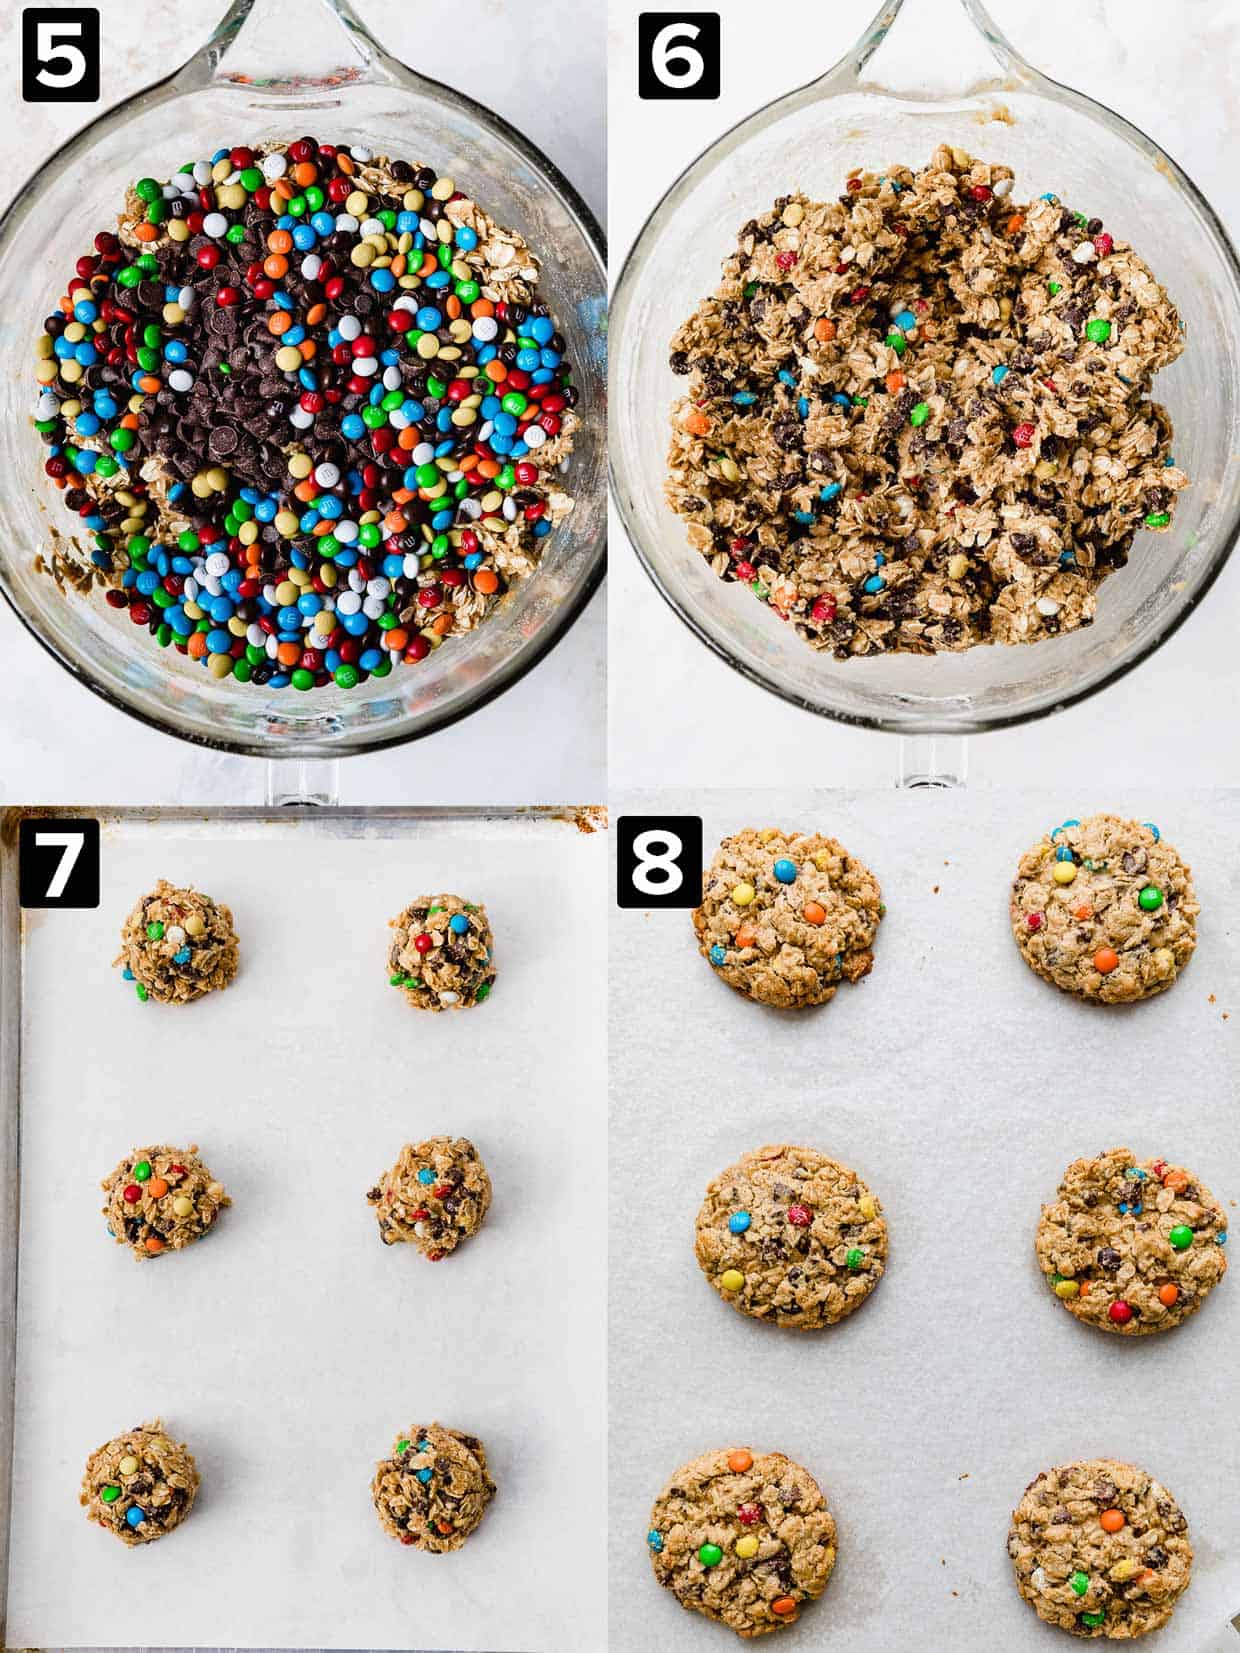 Four images showing the making of monster cookies: a glass bowl with M&M's, chocolate chips then the cookie dough mixed together, six cookie dough balls on baking sheet, then cookies baked.